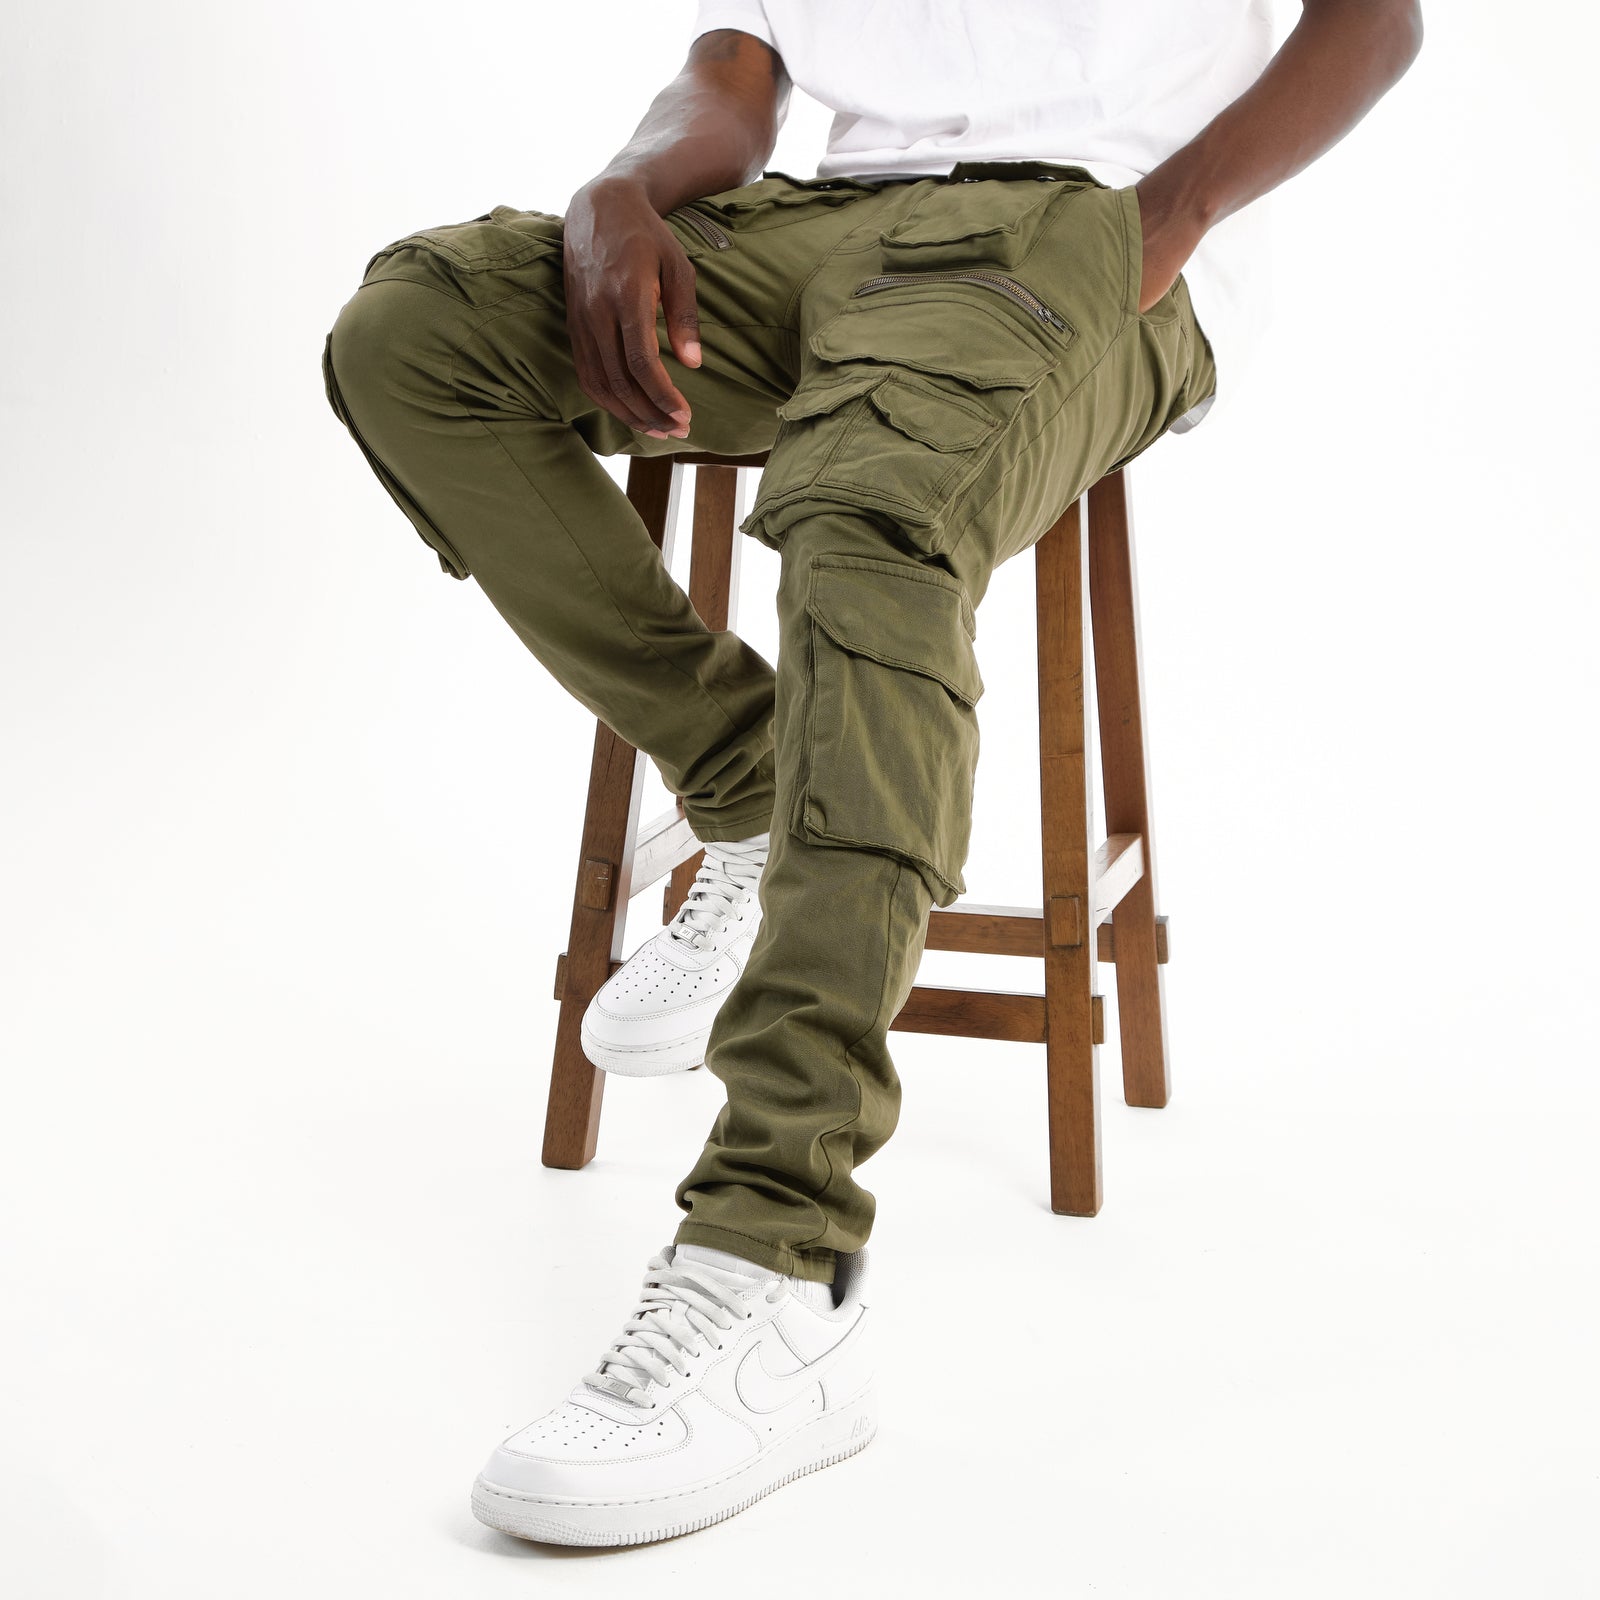 OLIVE UTILITY CARGO JEANS